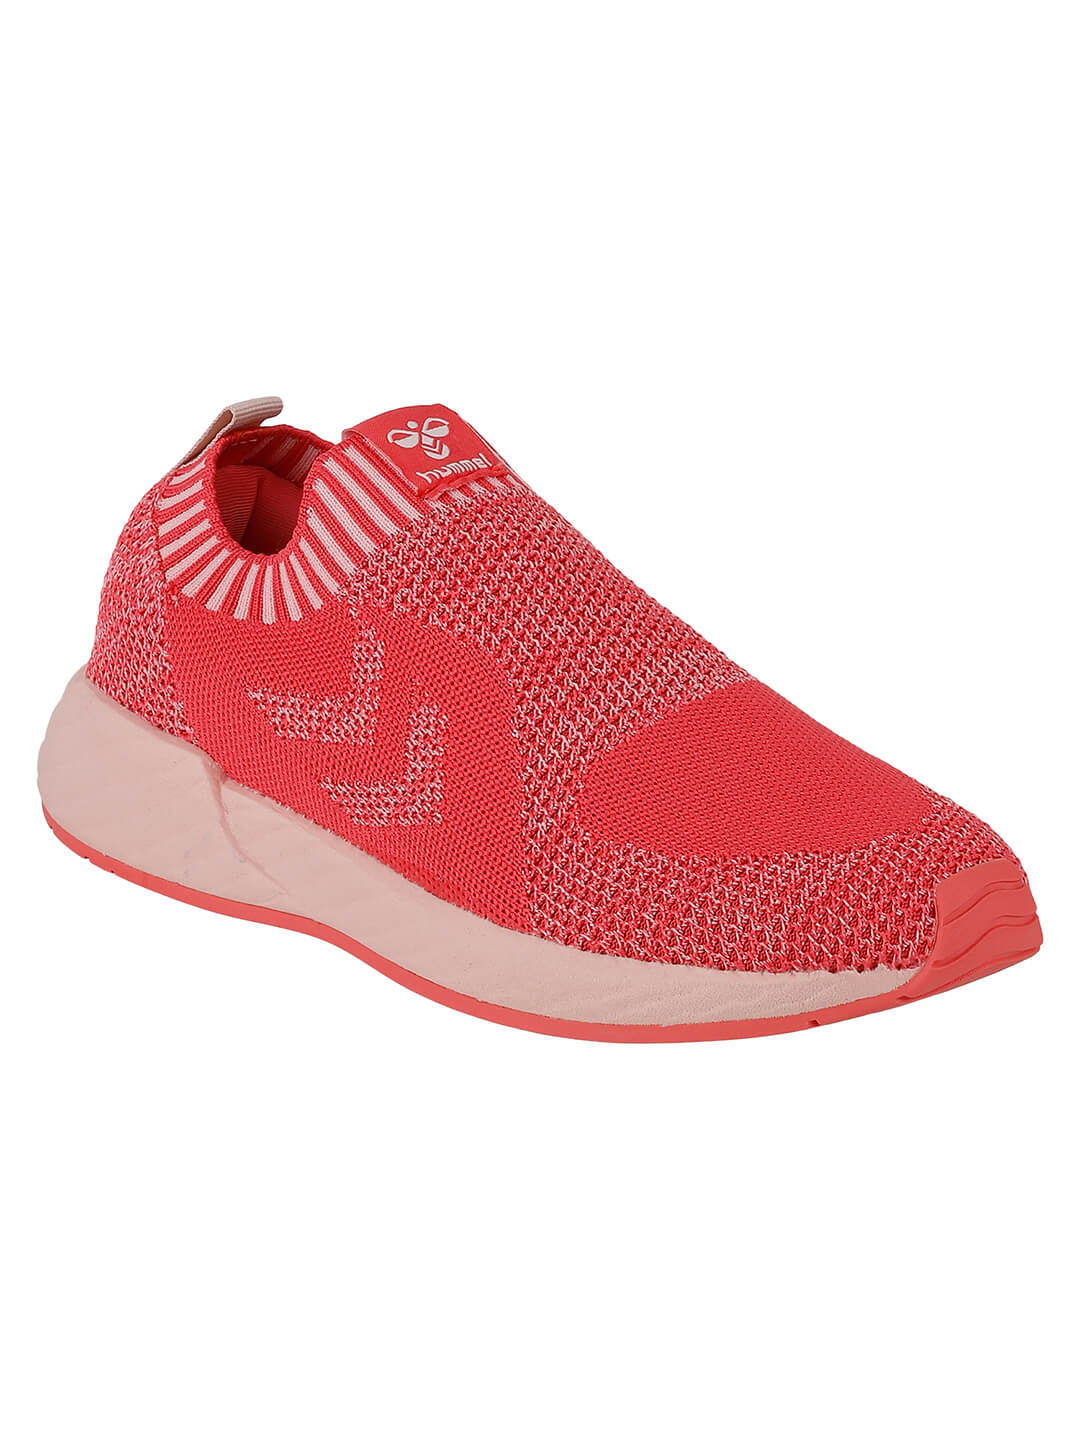 Zion Legend Seamles Pink Slip-Ons for Women